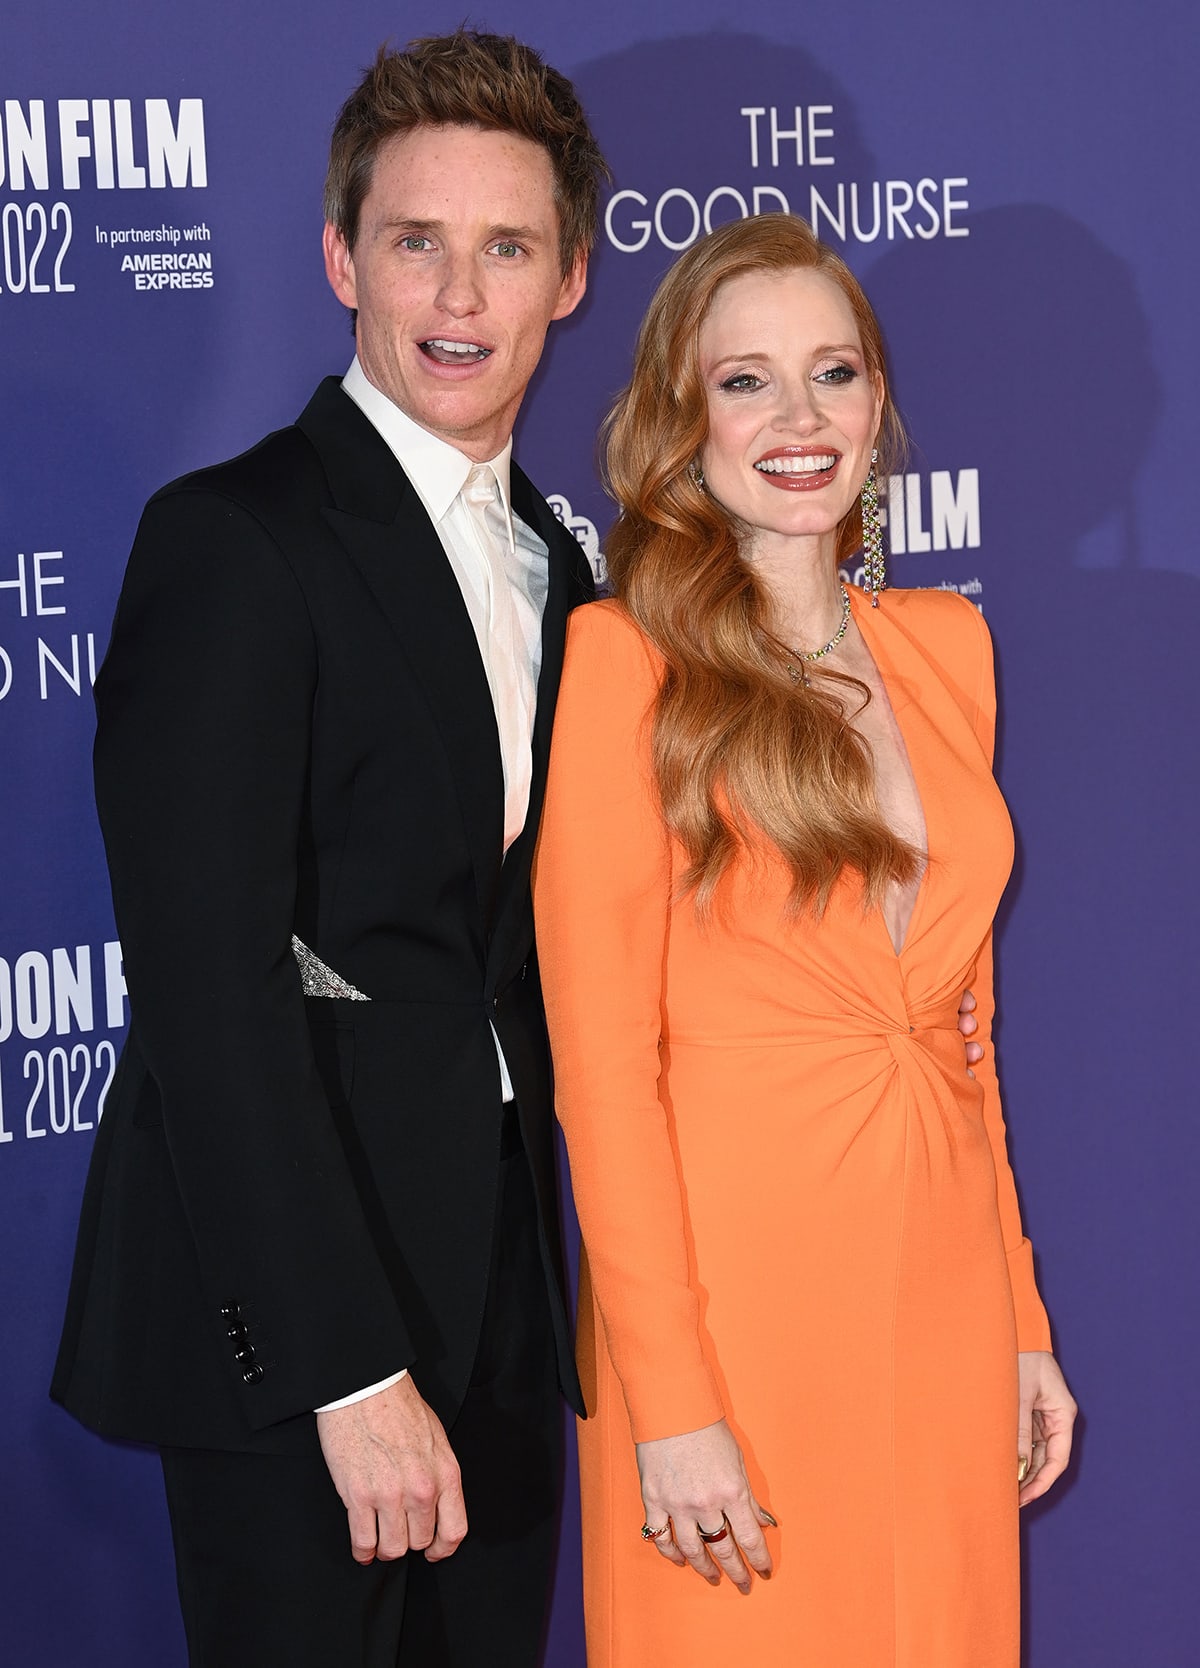 Eddie Redmayne and Jessica Chastain went to a nursing school to prepare themselves for their respective roles in The Good Nurse